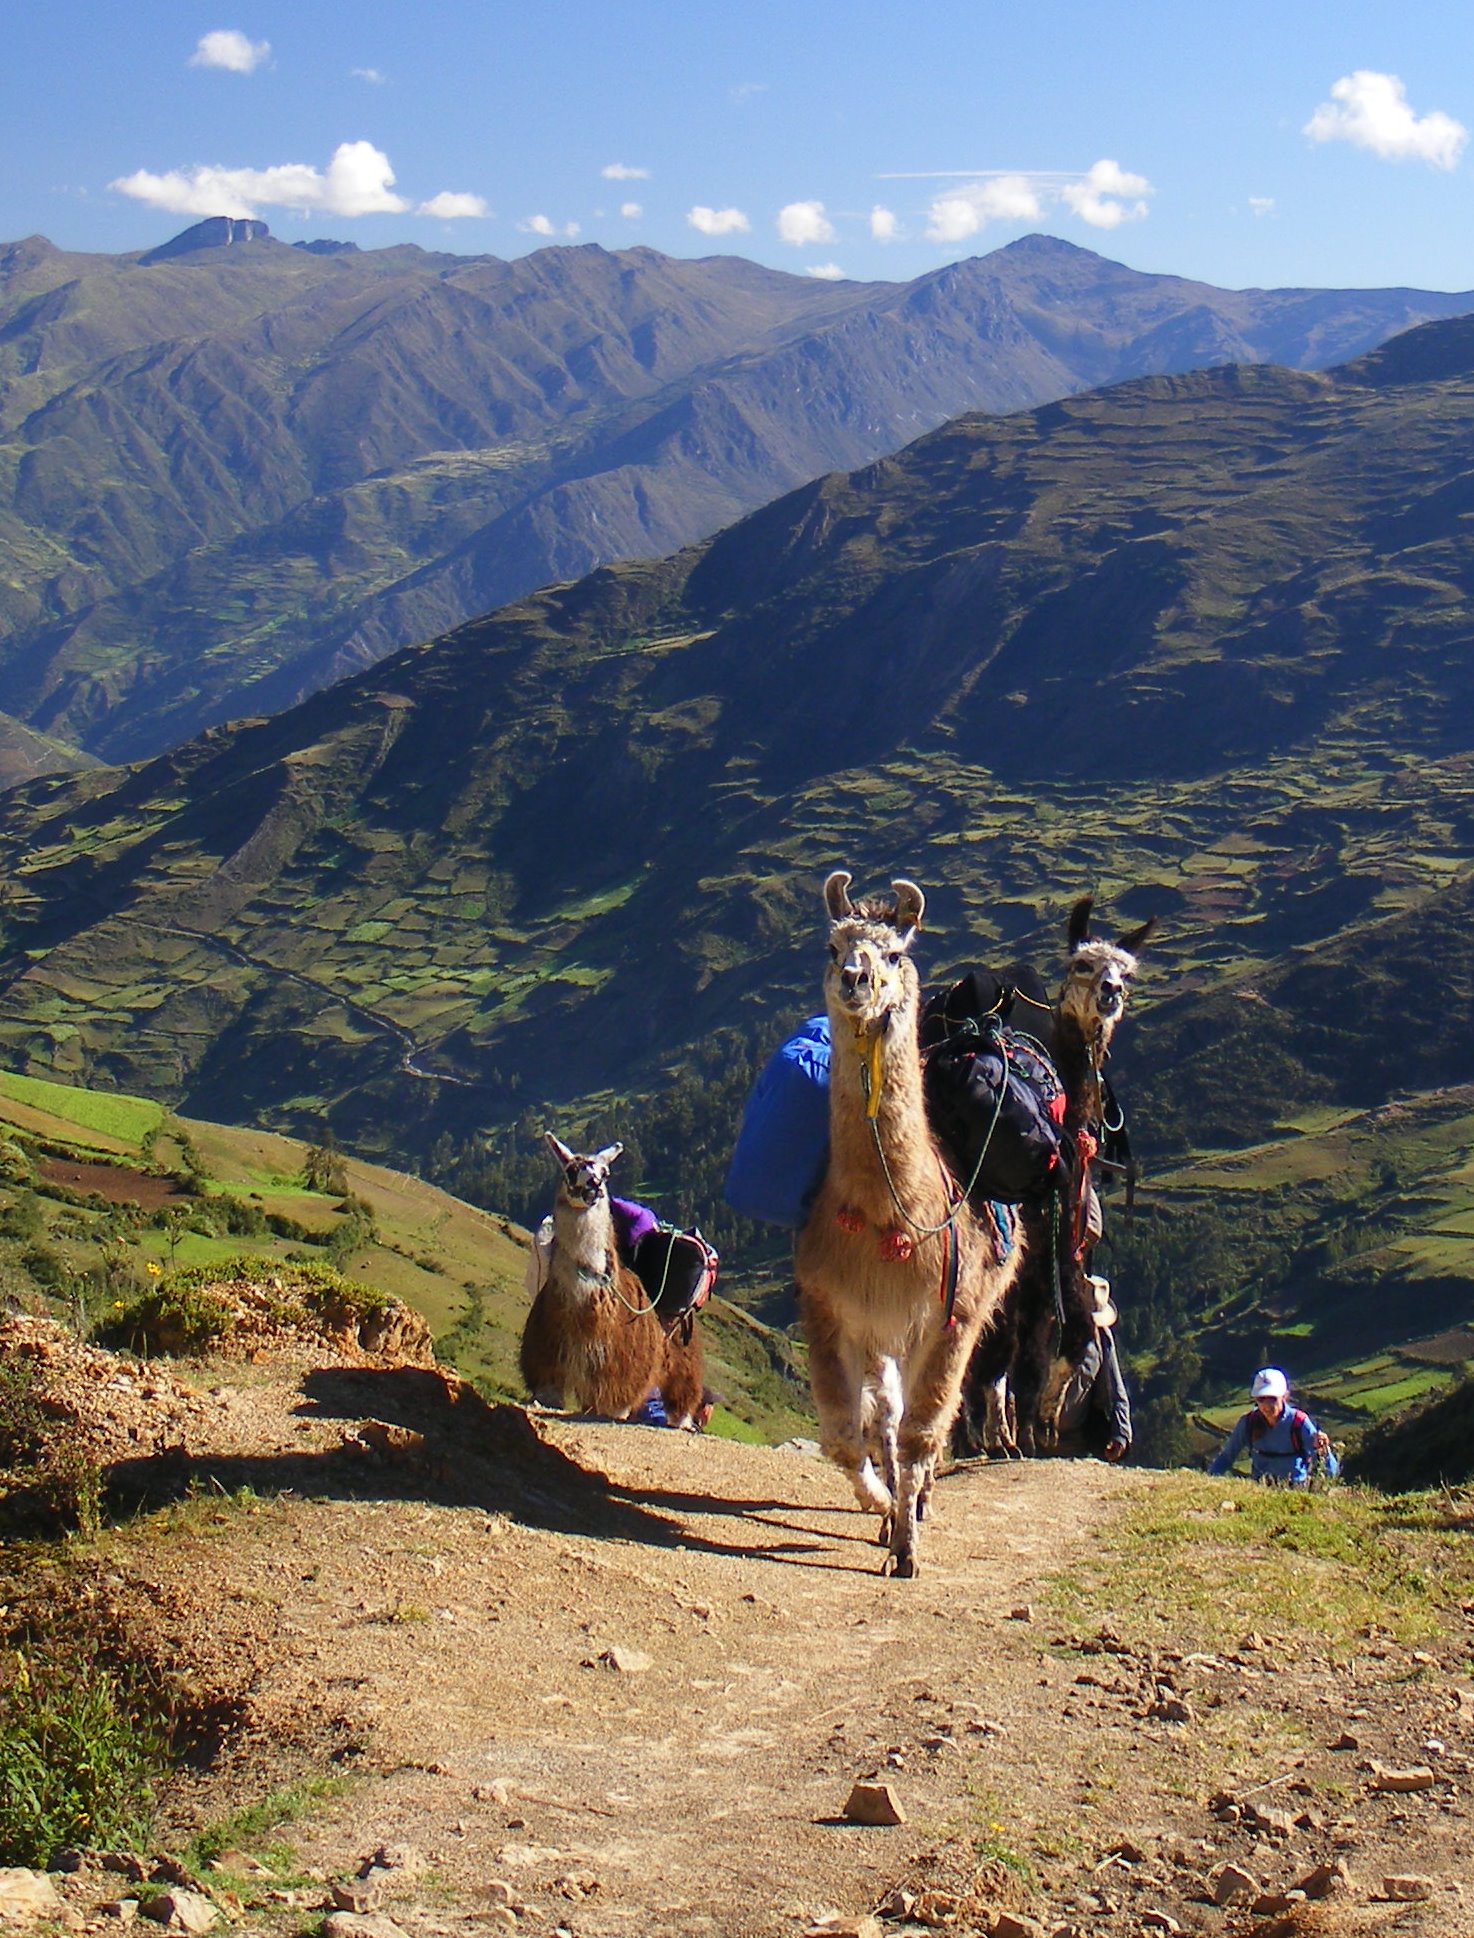 Llamas helping with the load as Allen hikes with colleagues along the best remaining section of the Great Inca Highway (Gran Ruta Inca in Spanish; Inca Nani in the Quechua of this region) in the Cordillera Blanca of the Peruvian Andes.